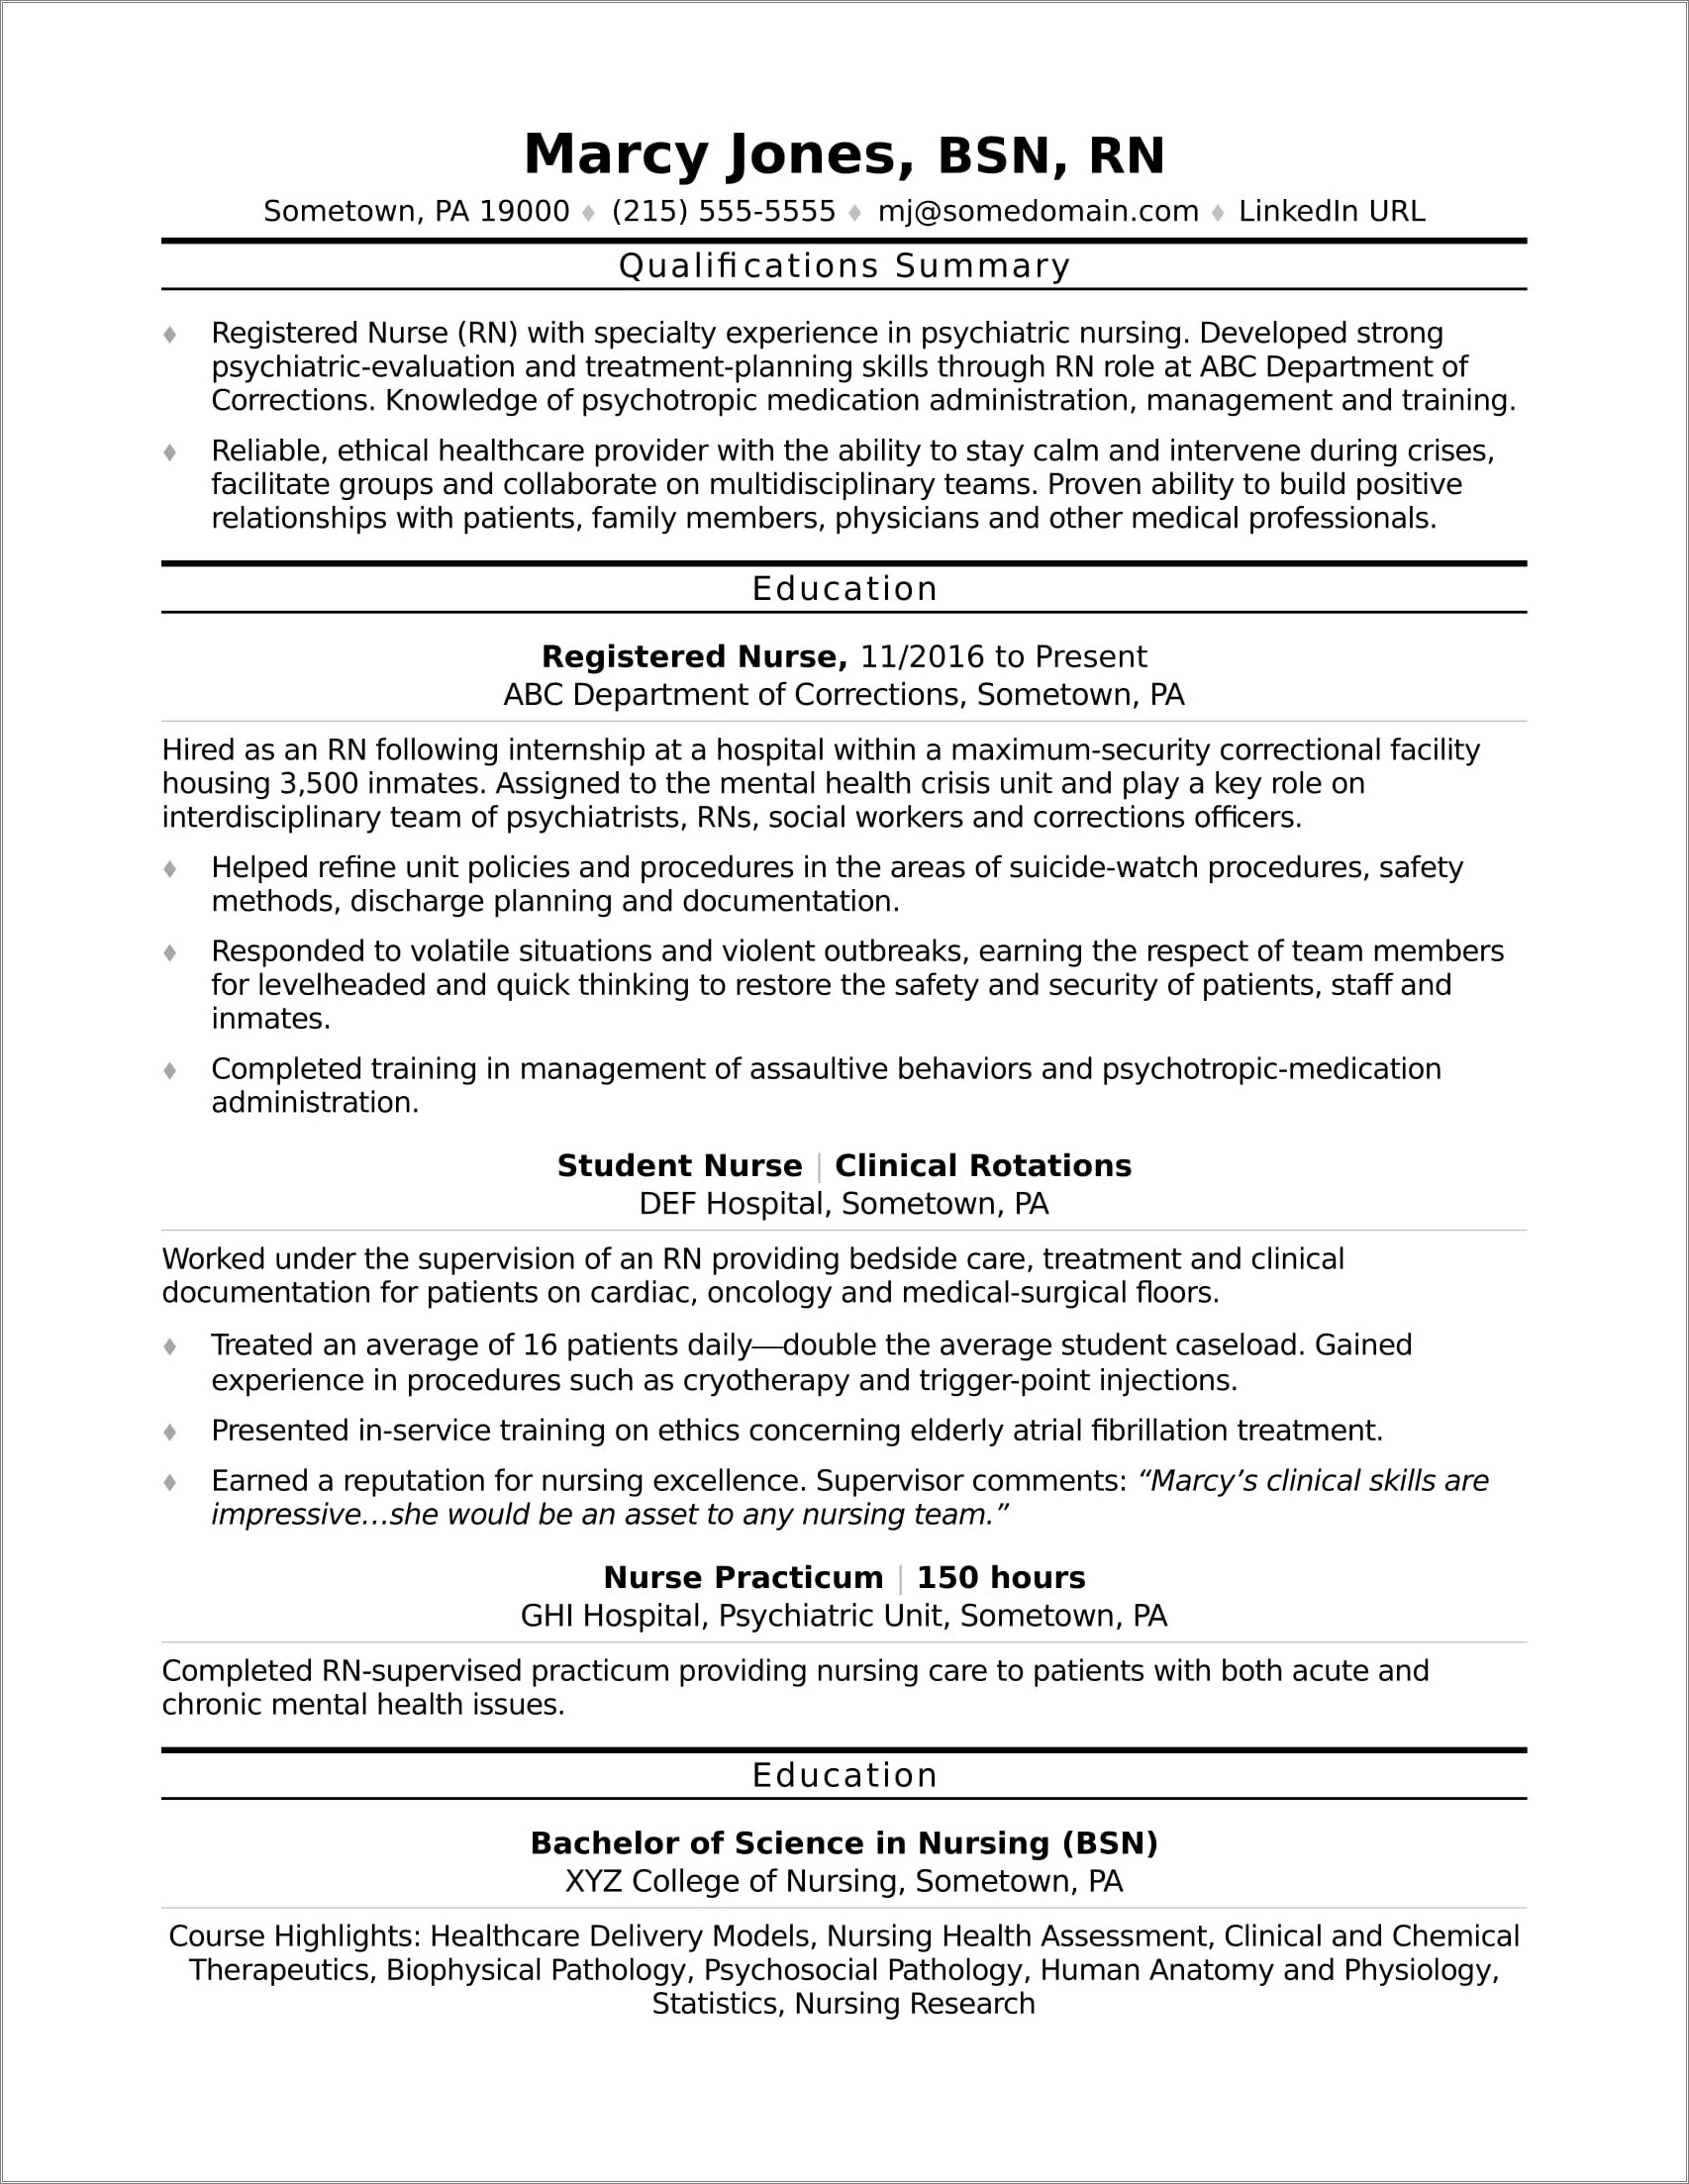 Examples Of Qualifications For Nursing Resumes